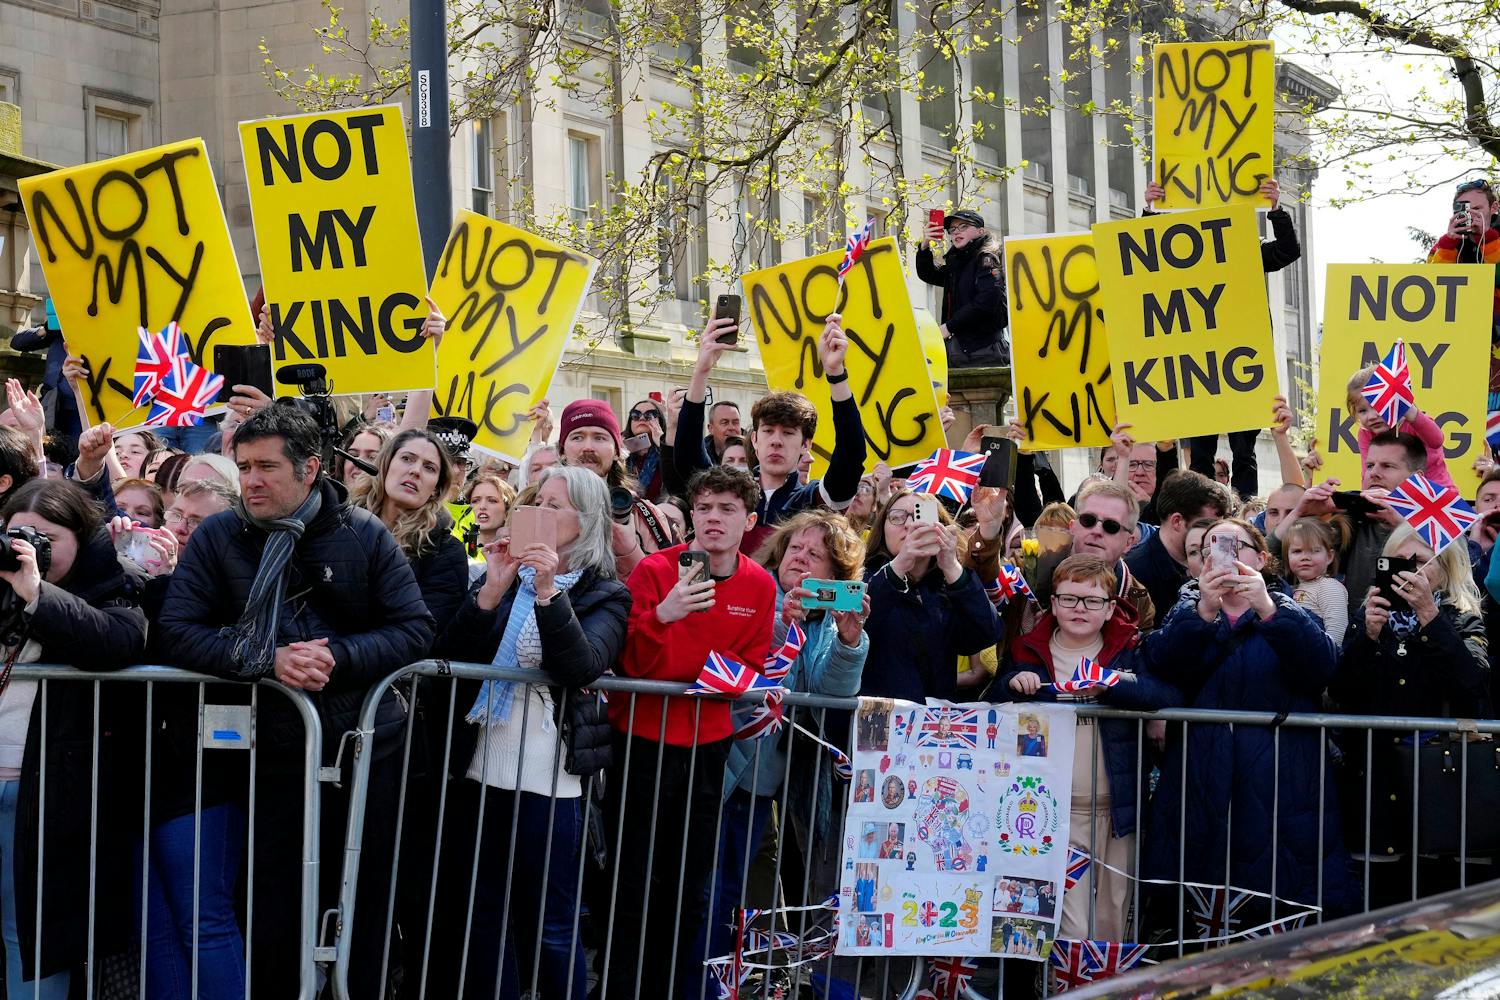 The United Kingdom restricts the right to protest